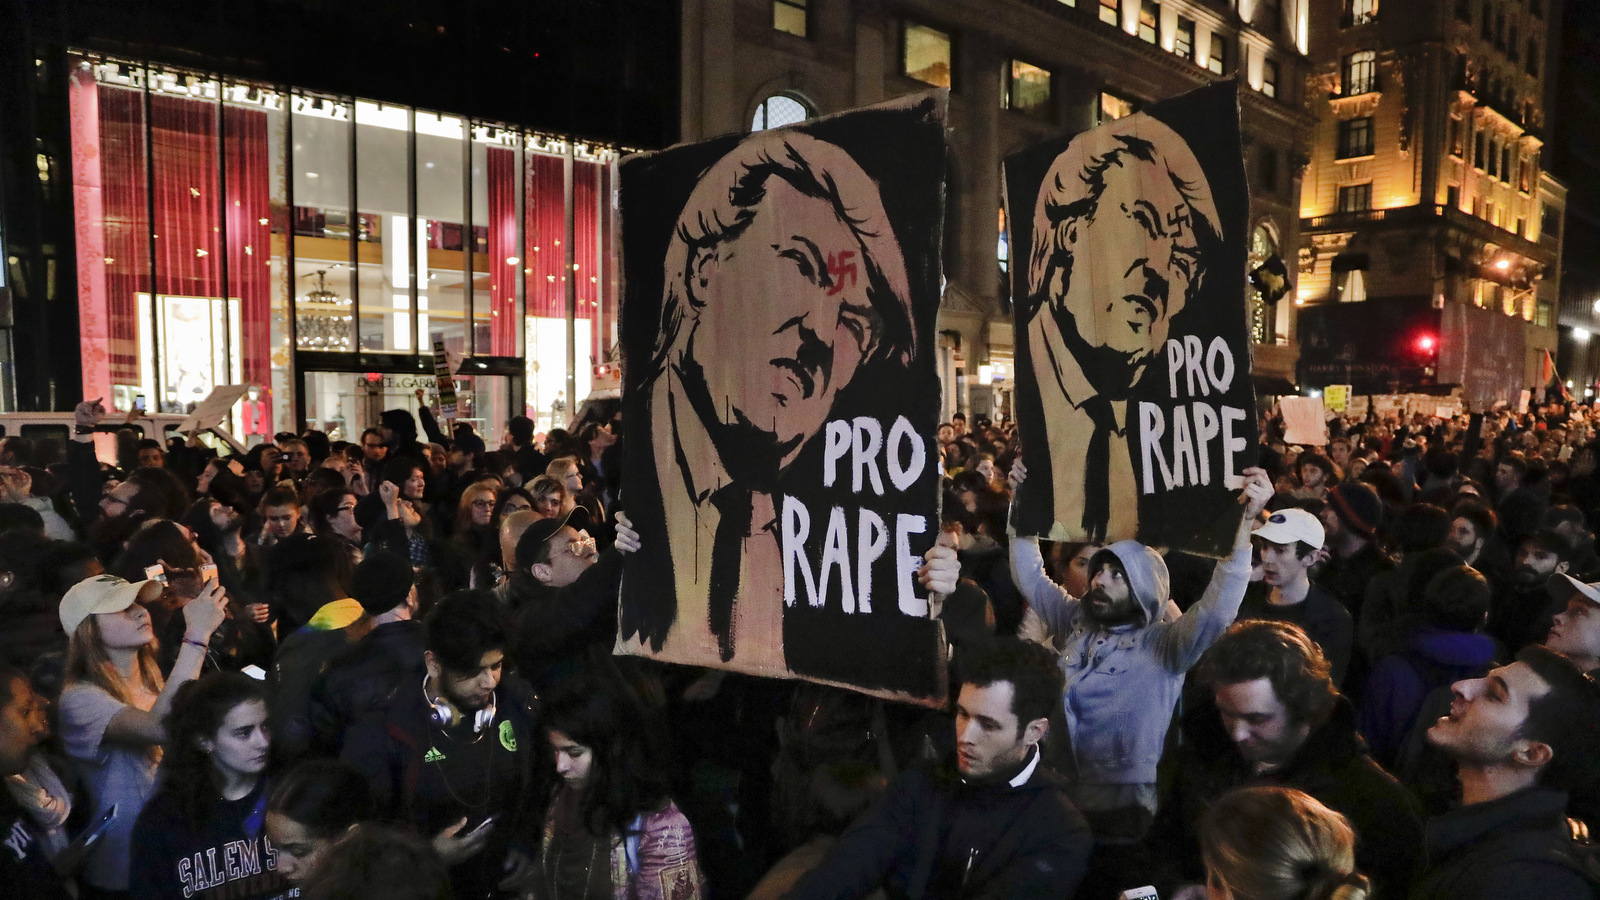 Protesters march along Fifth Avenue outside Trump Tower, Wednesday, Nov. 9, 2016, in New York, in opposition of Donald Trump's presidential election victory. (AP Photo/Julie Jacobson)